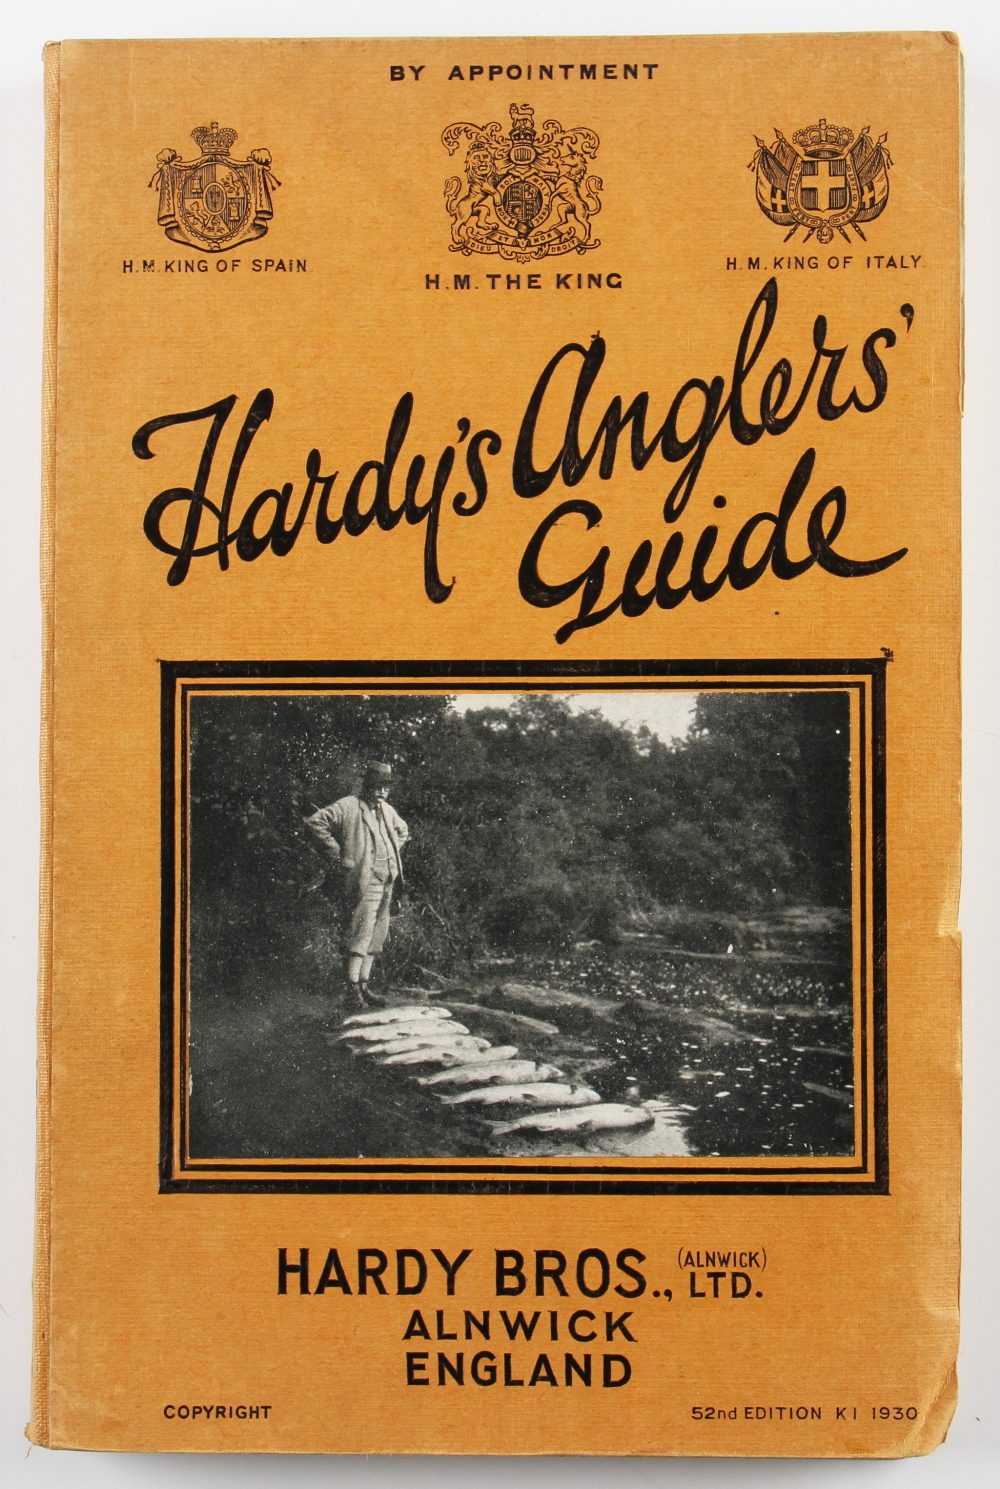 Hardy Angler's Guide 1930 in good condition internally clean with stepped index. Clean covers,